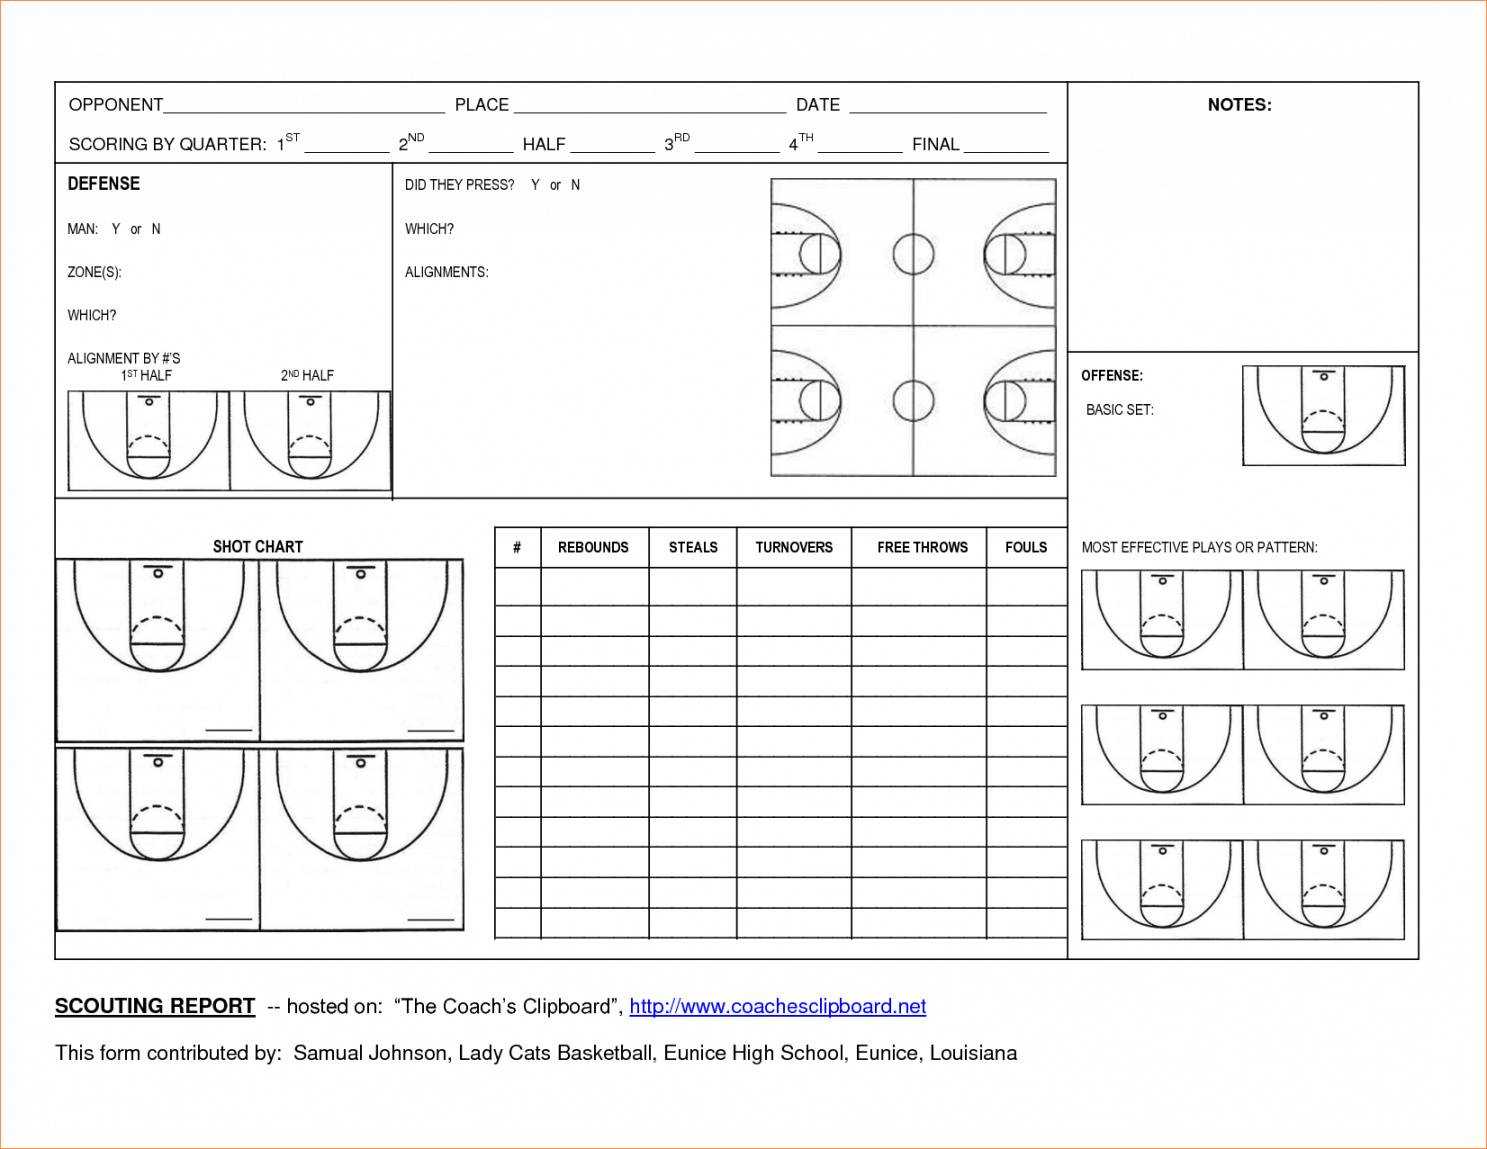 Editable Basketball Scouting Report Template Dltemplates Inside Basketball Scouting Report Template